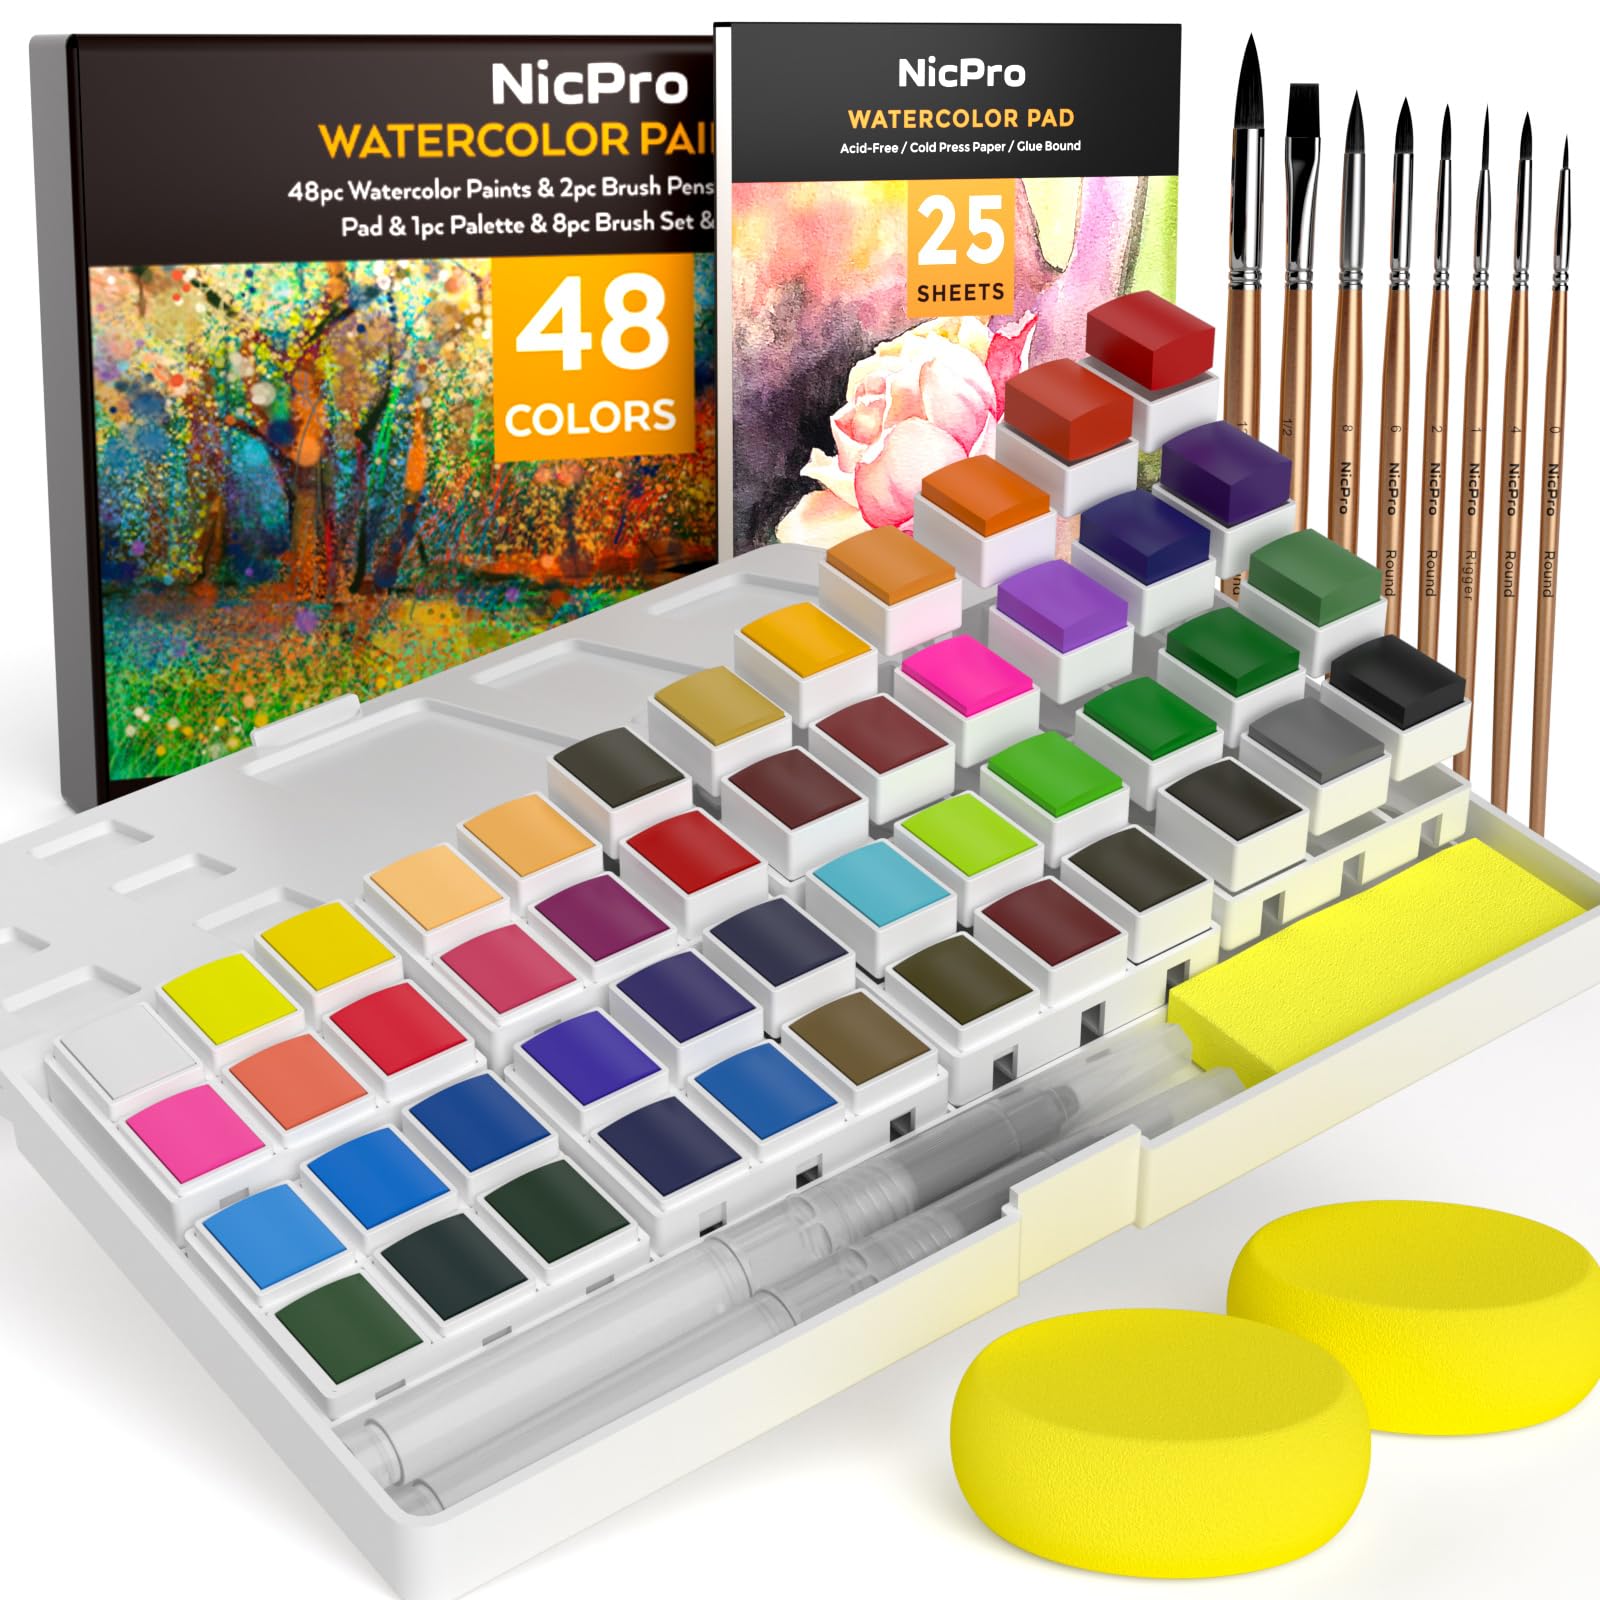 Premium Photo  Artist paint brushes and paint cans of paint over bright  watercolor background